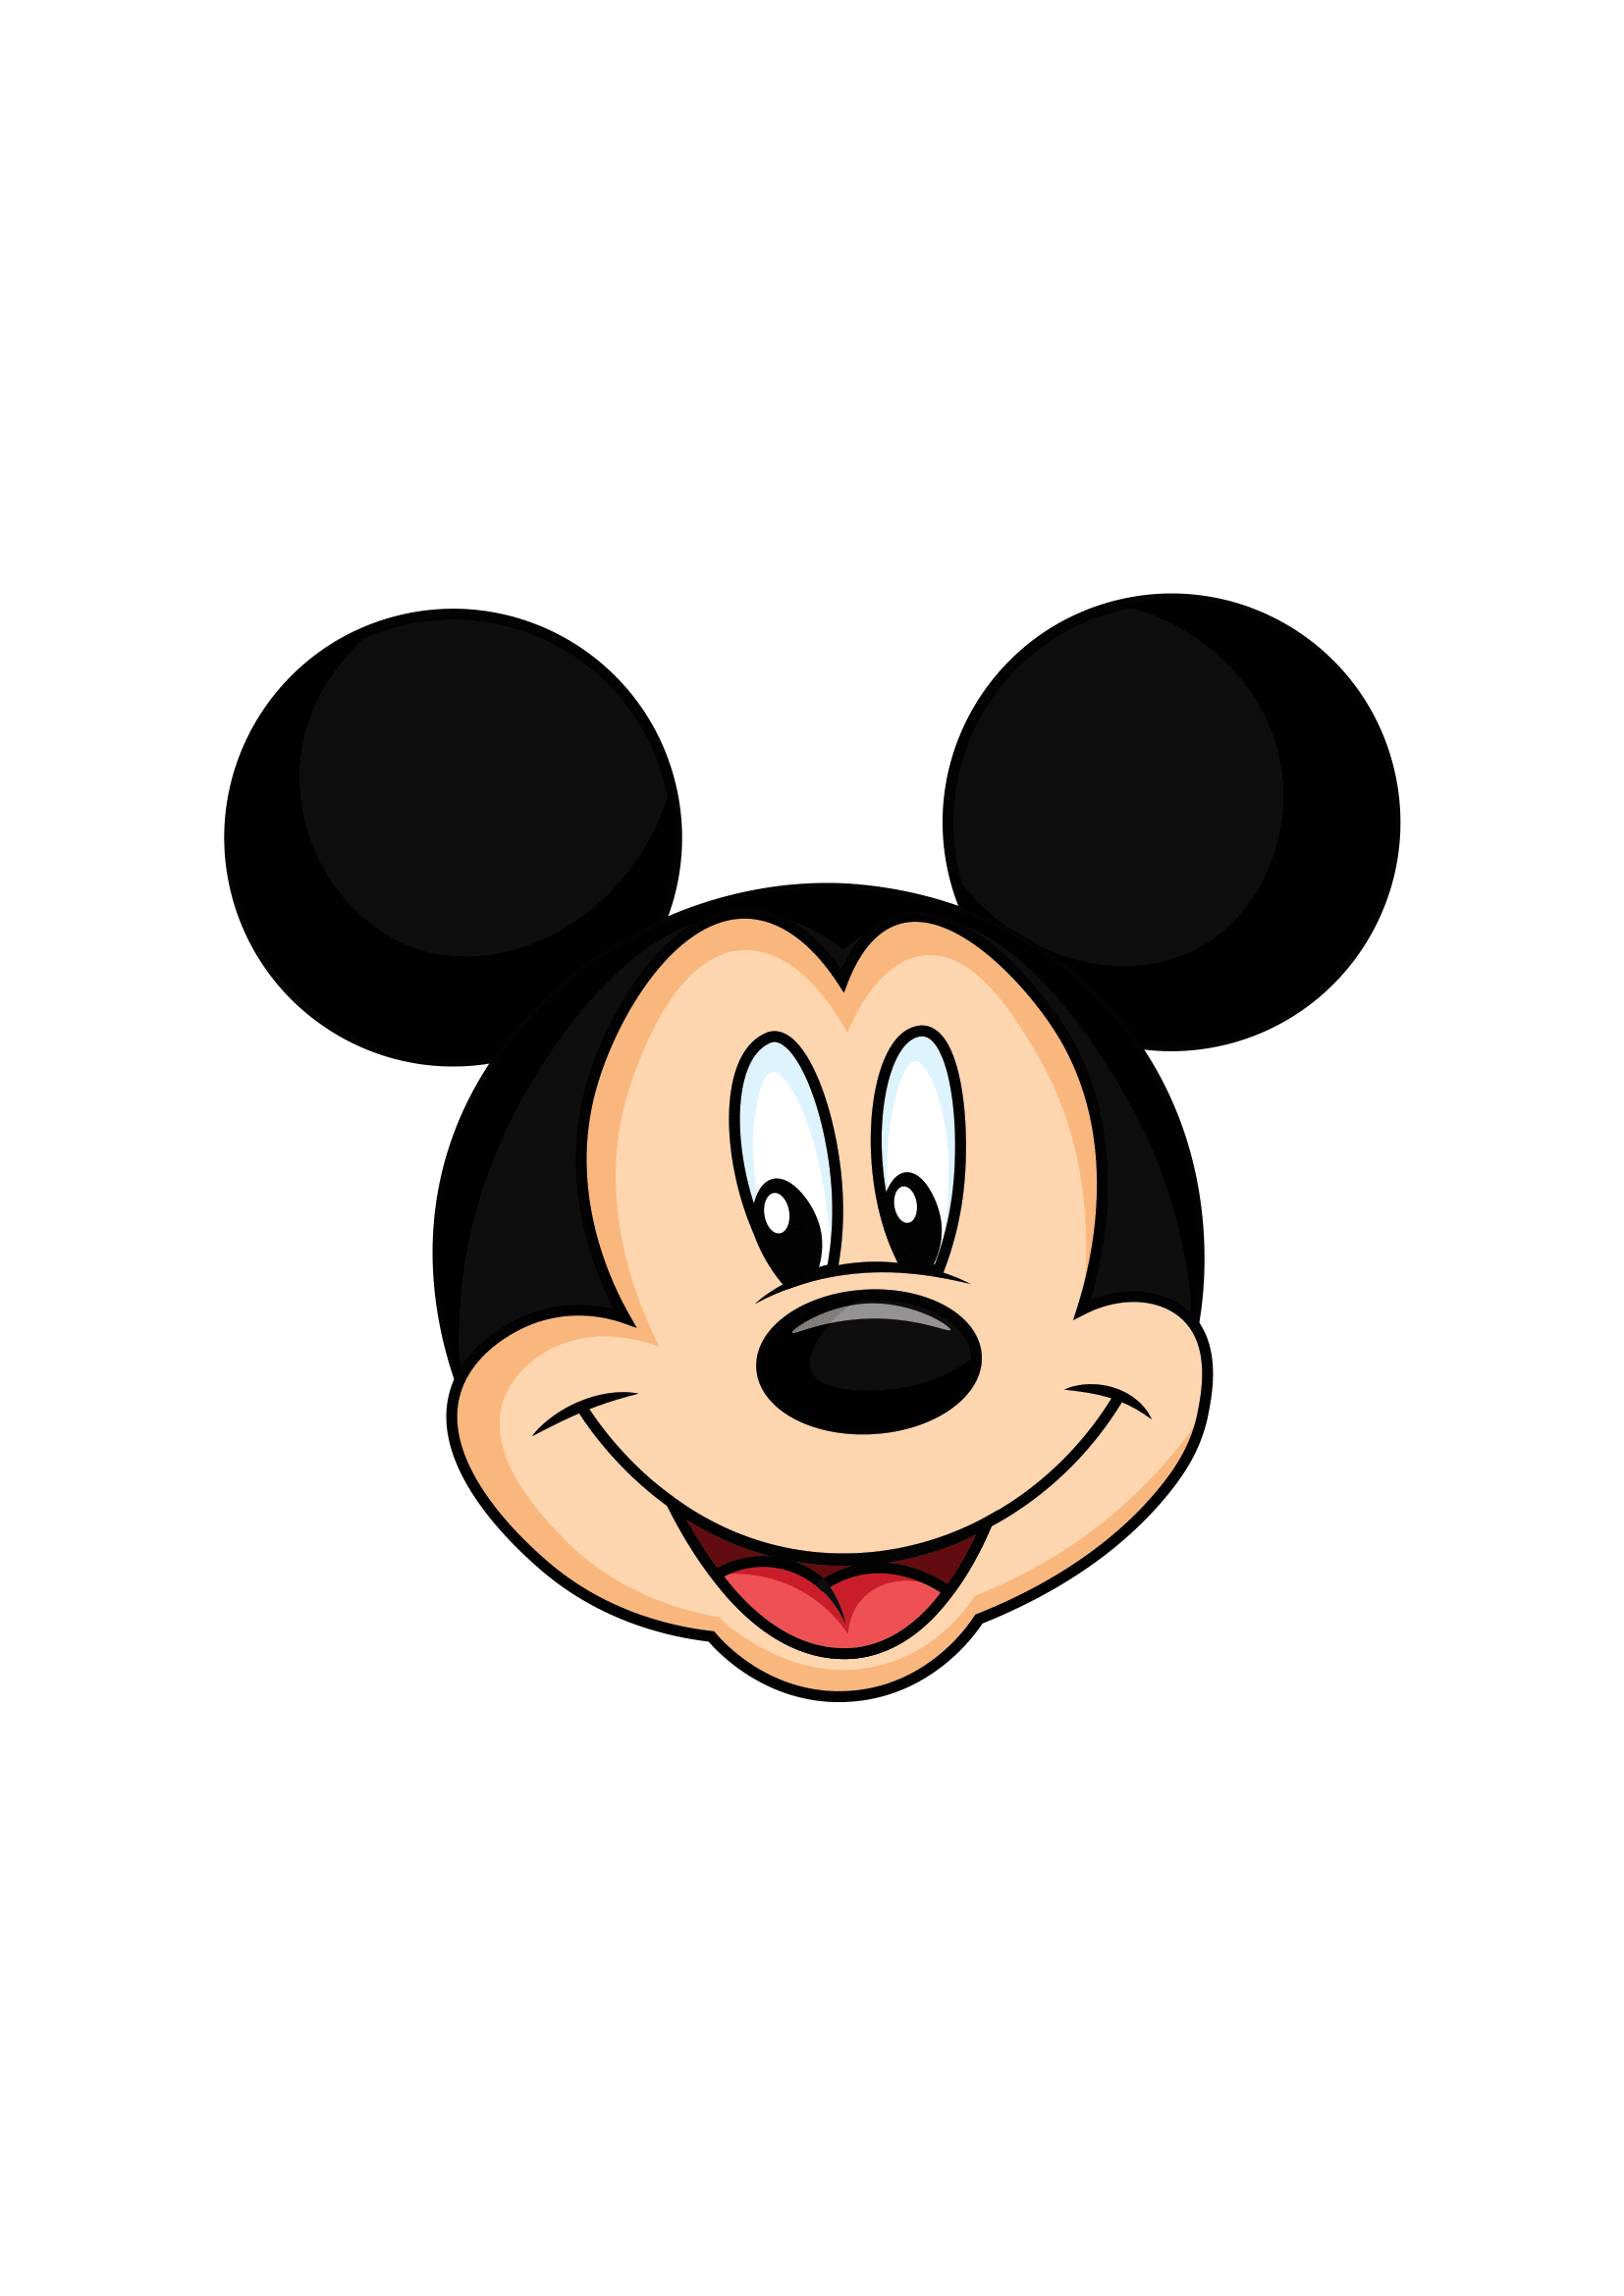 How to Draw Mickey Mouse Face Step by Step Printable